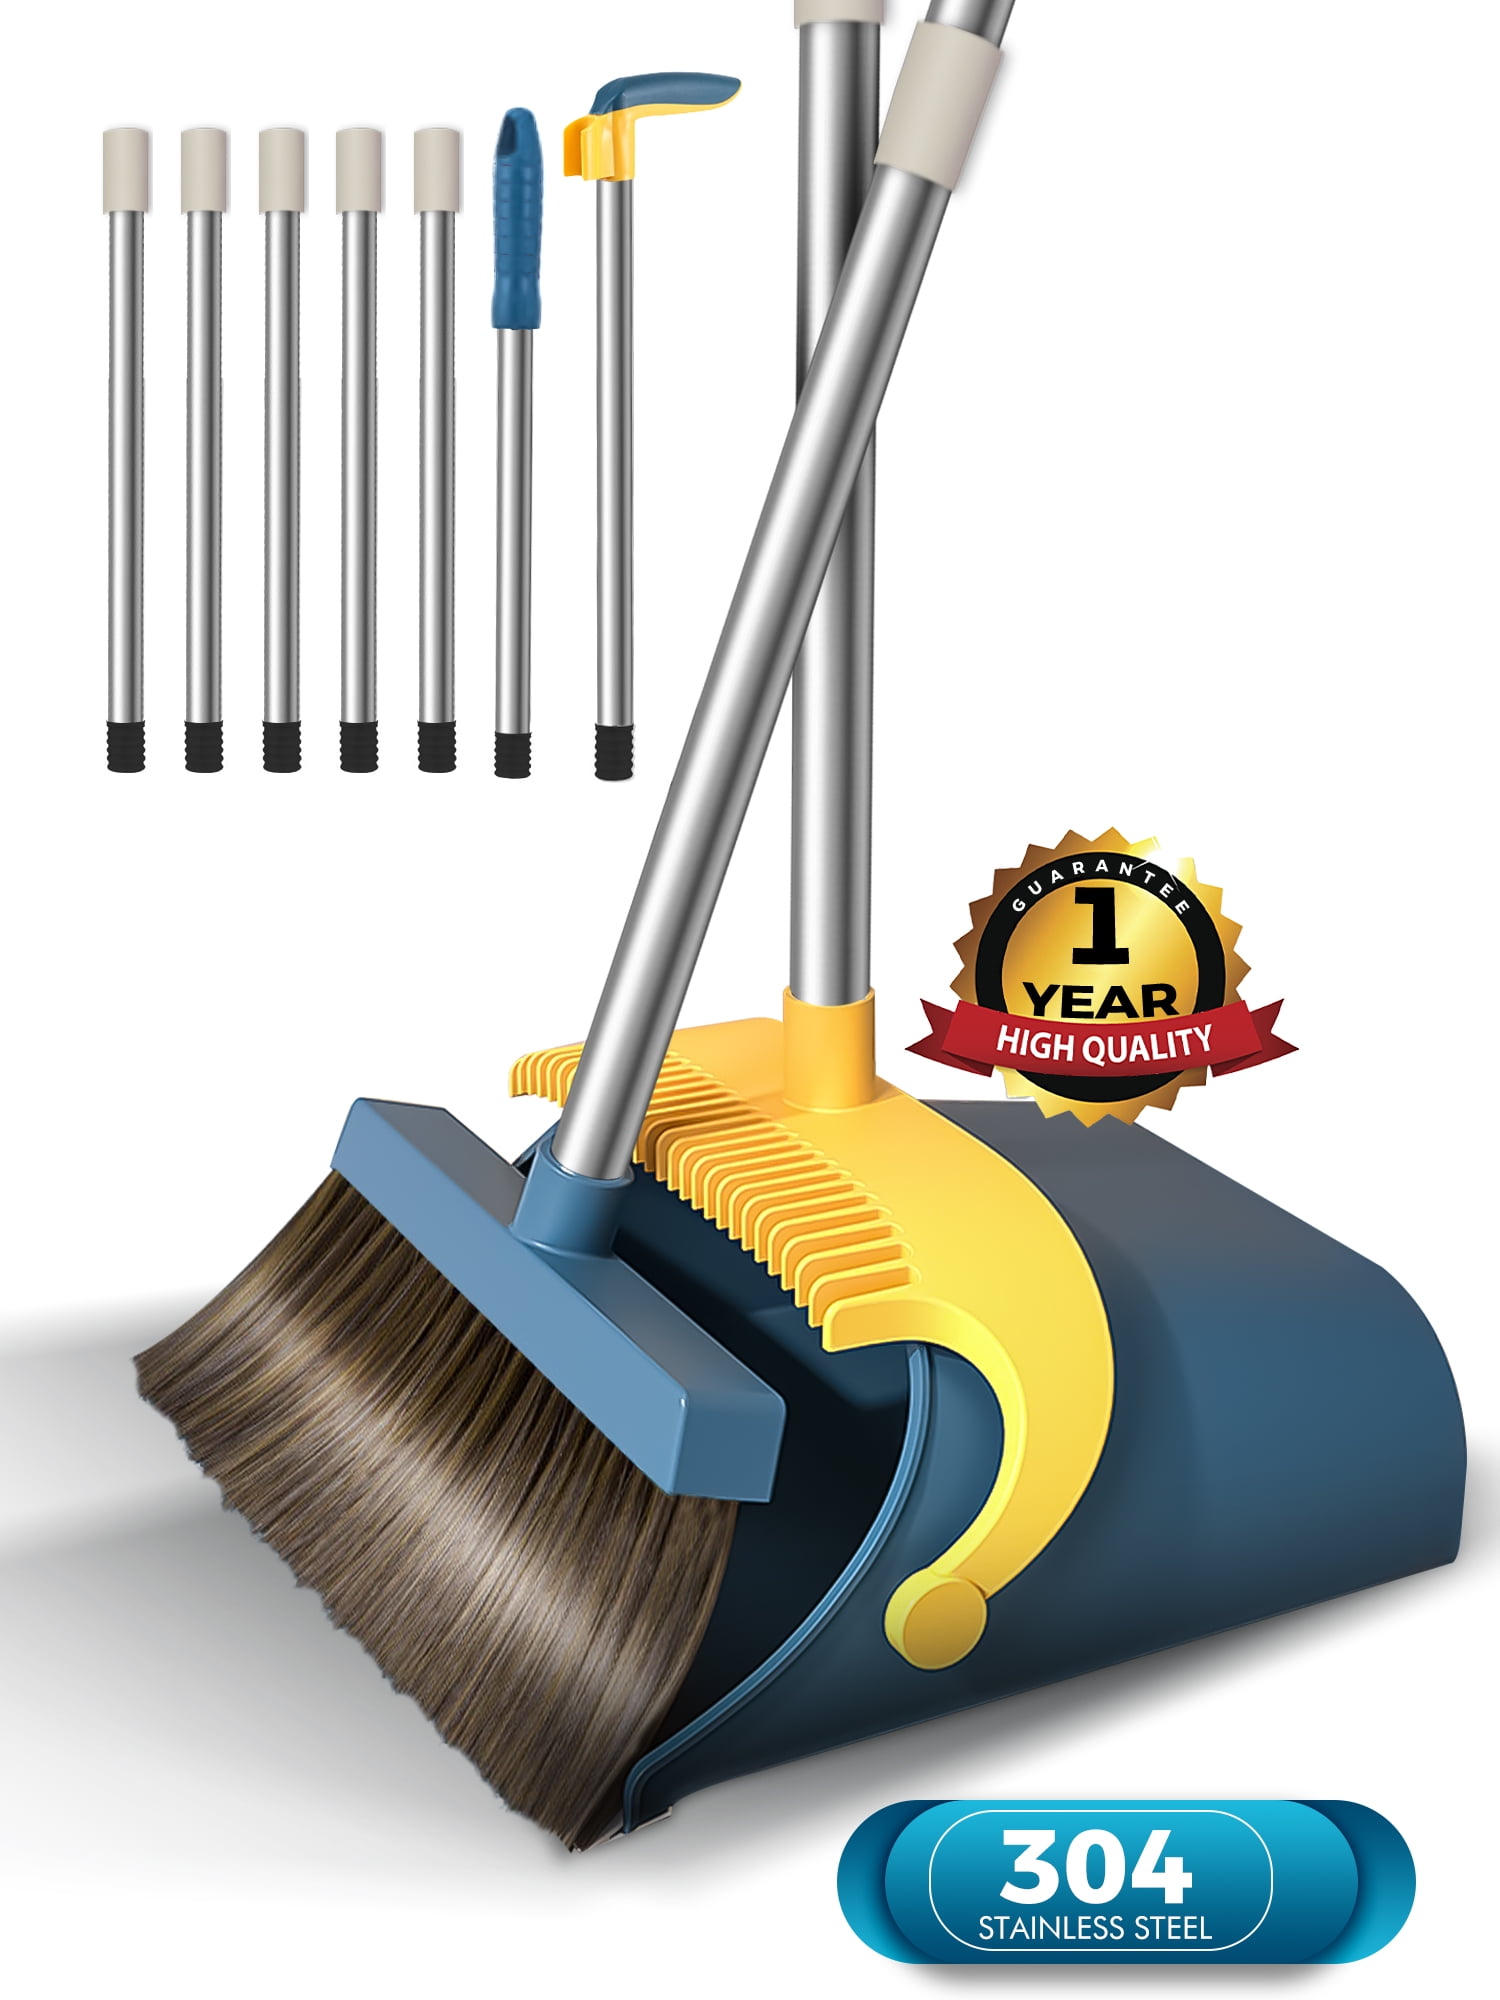 Happylost Upgrade Broom and Dustpan Set, Self-Cleaning with